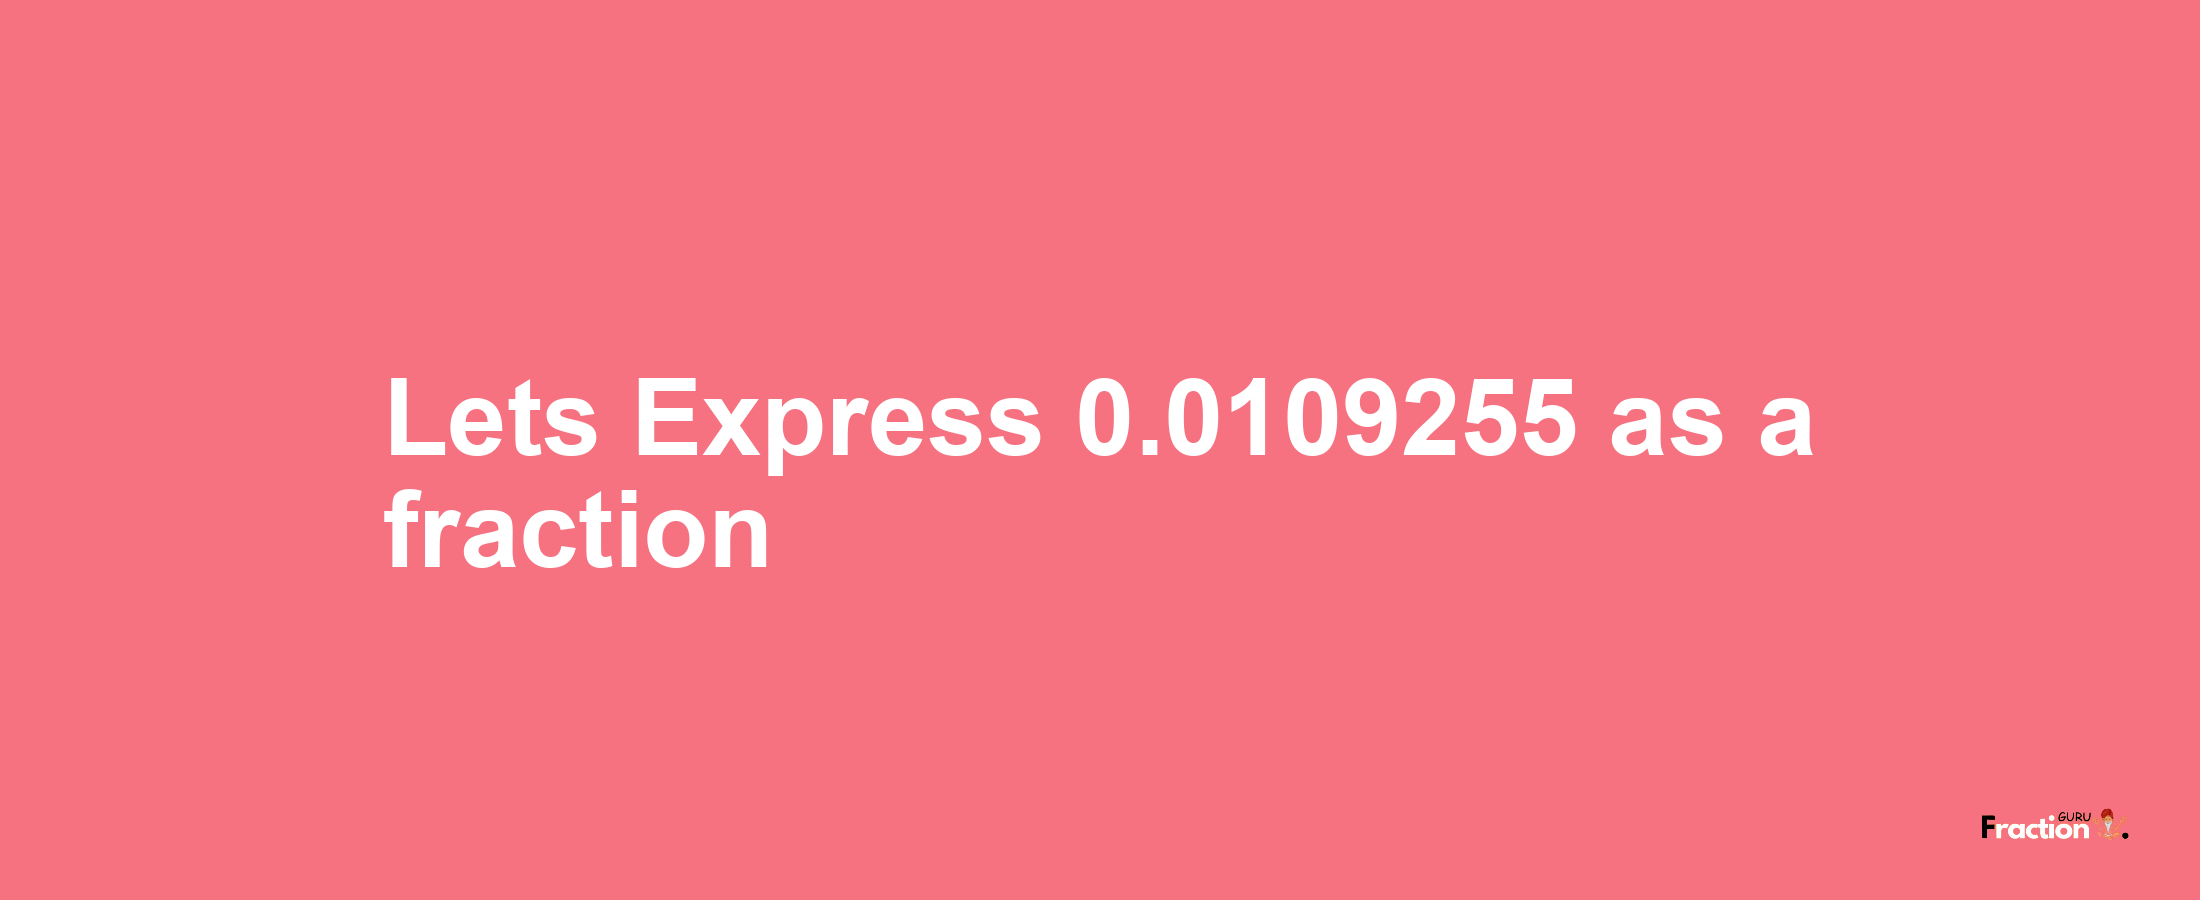 Lets Express 0.0109255 as afraction